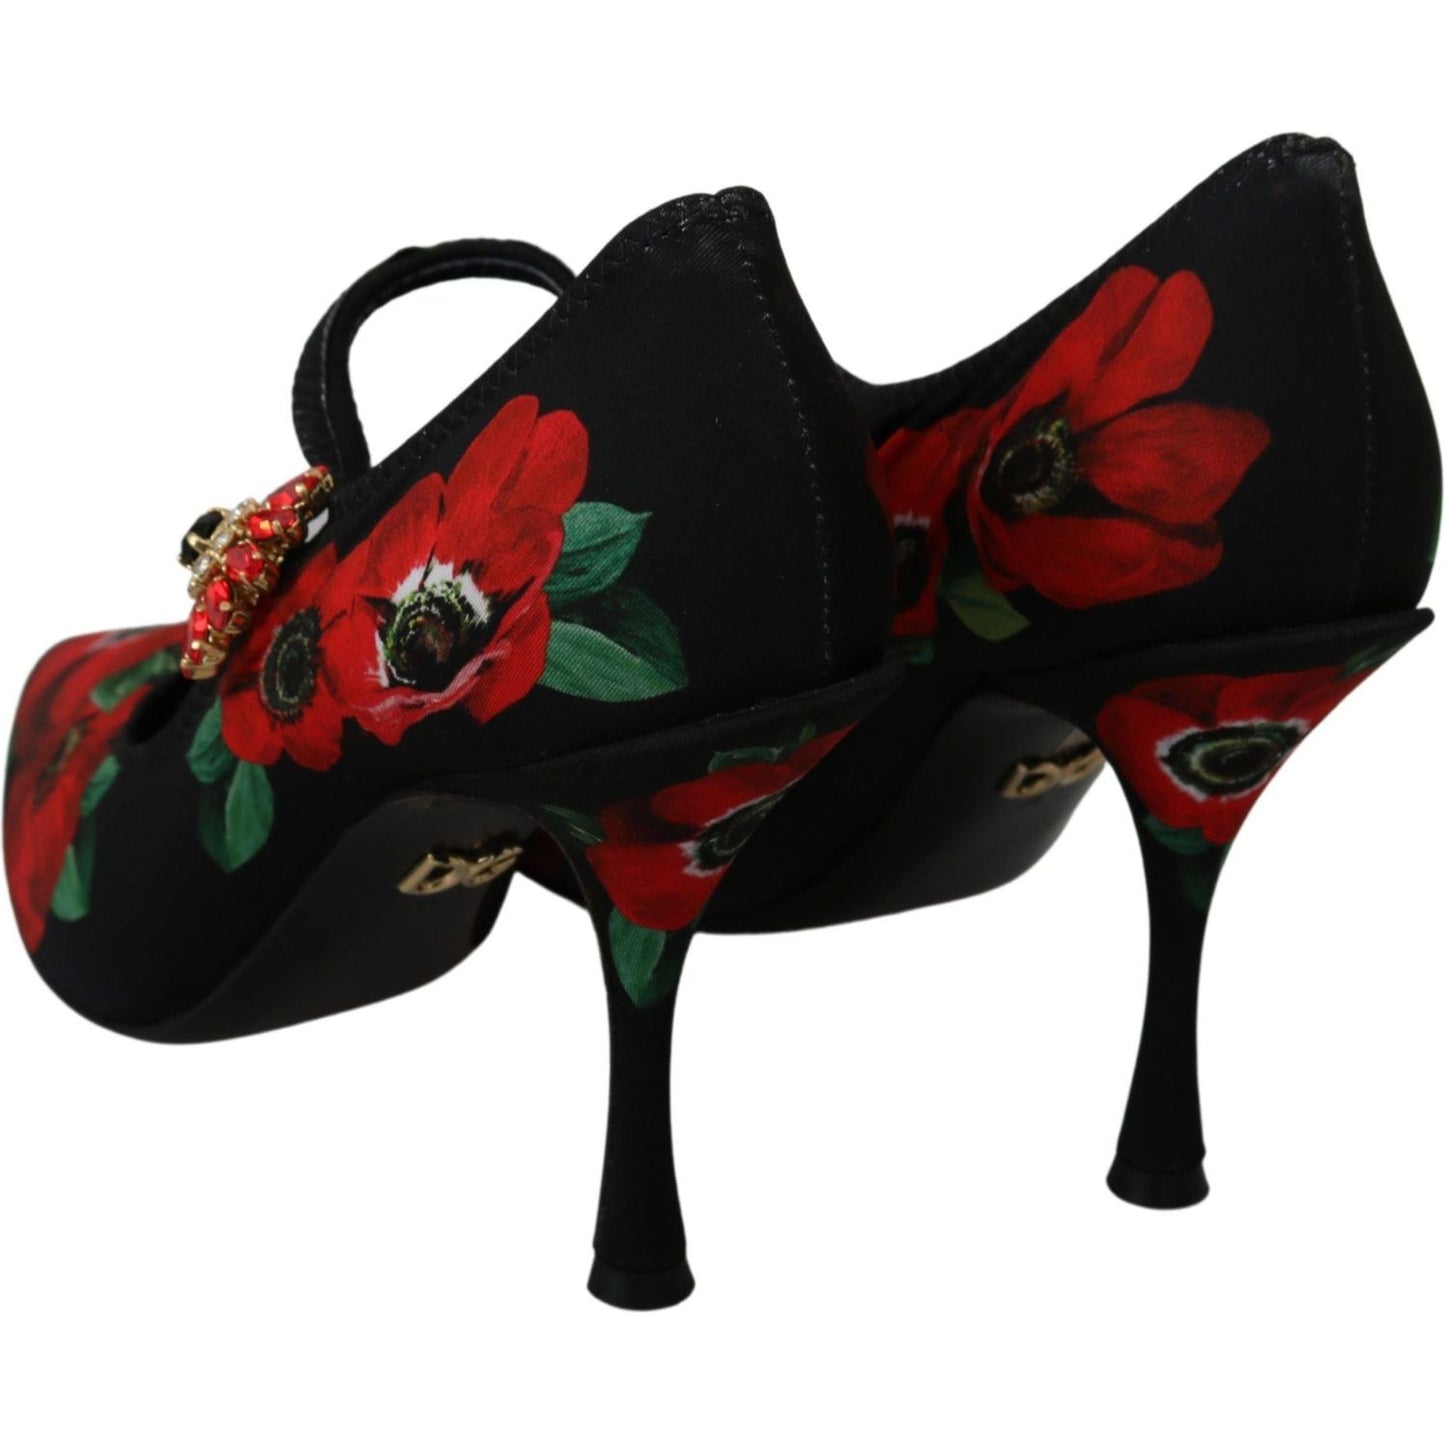 Dolce & Gabbana Floral Mary Janes Pumps with Crystal Detail black-red-floral-mary-janes-pumps-shoes Shoes IMG_0228-scaled-6bcbf473-1a2.jpg